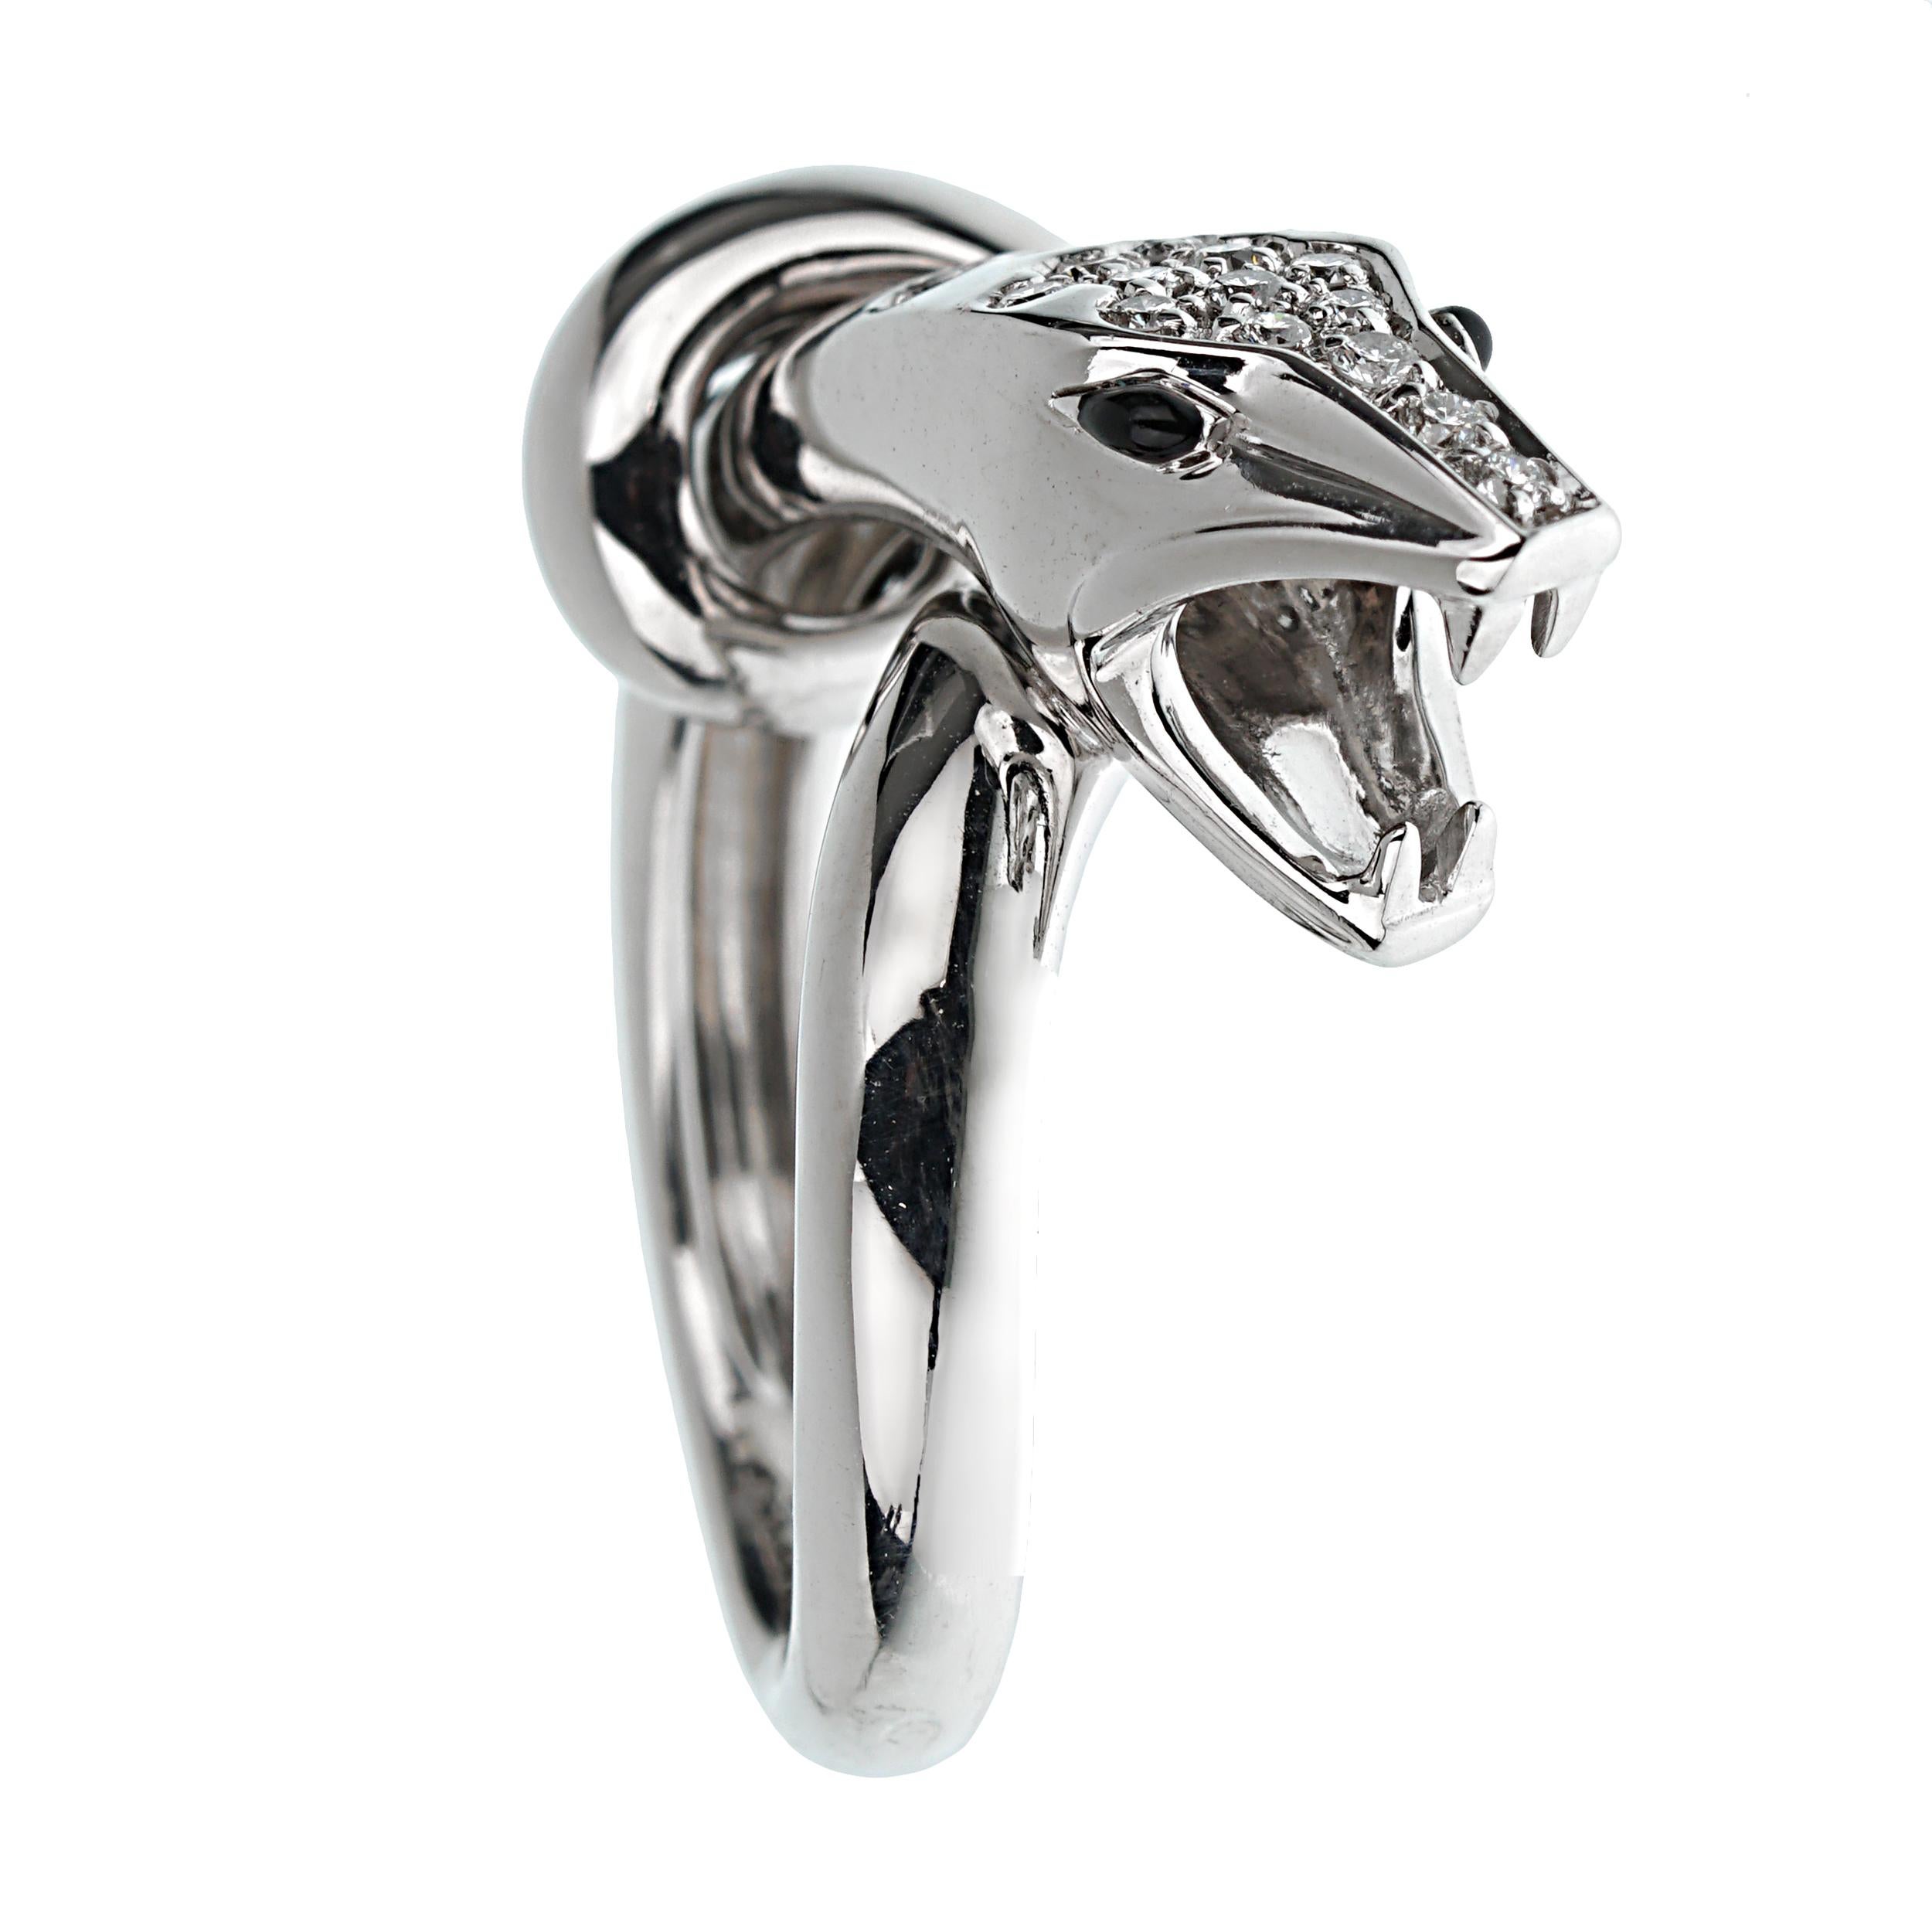 Boucheron Kaa Snake White Gold Diamond Ring In Excellent Condition For Sale In Feasterville, PA